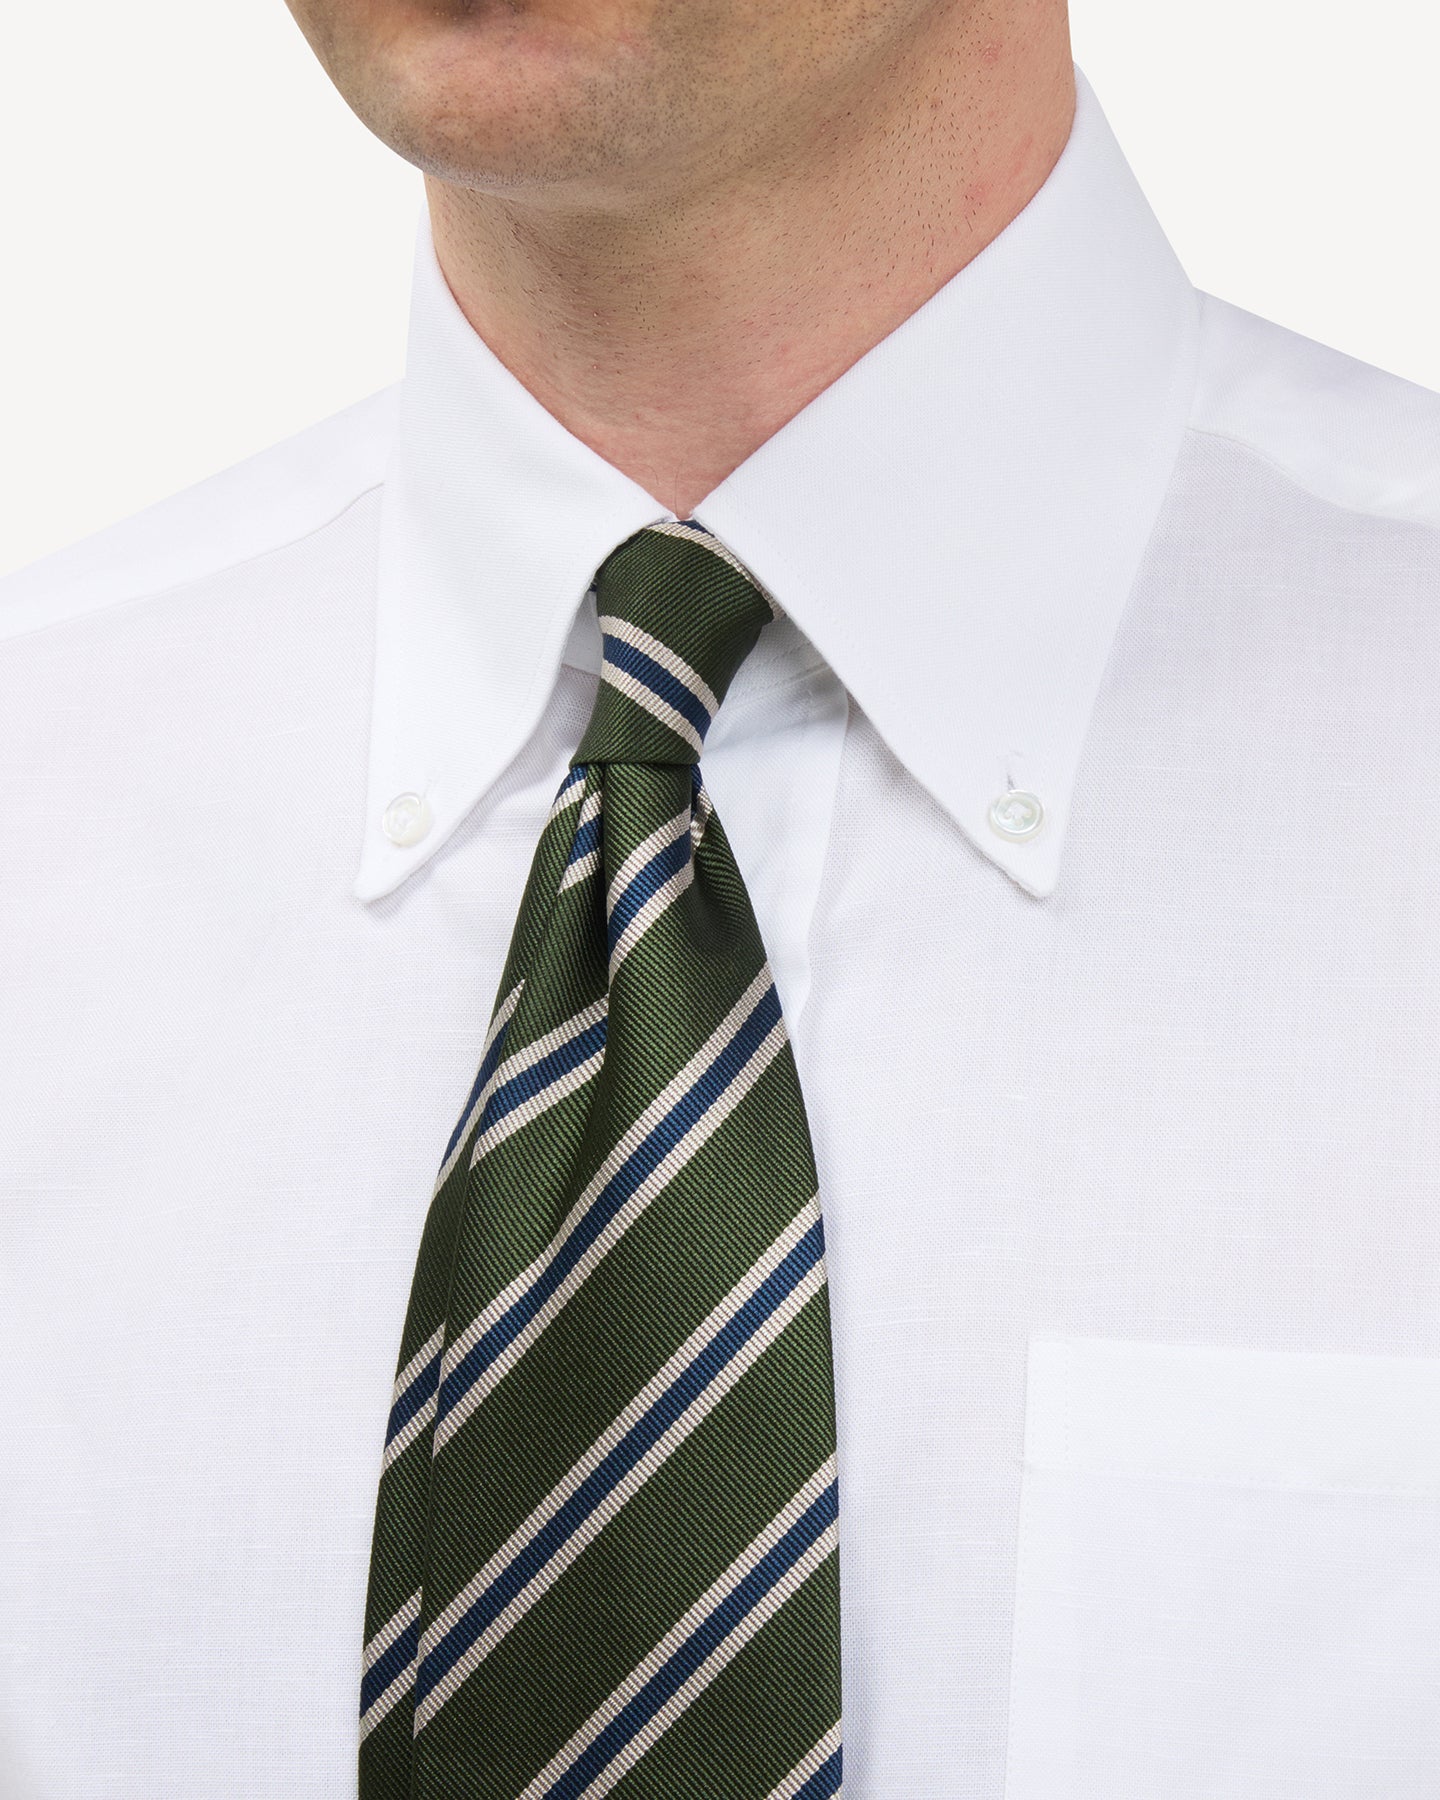 Man wearing a white button down shirt and a green, tan and navy regimental stripe repp tie